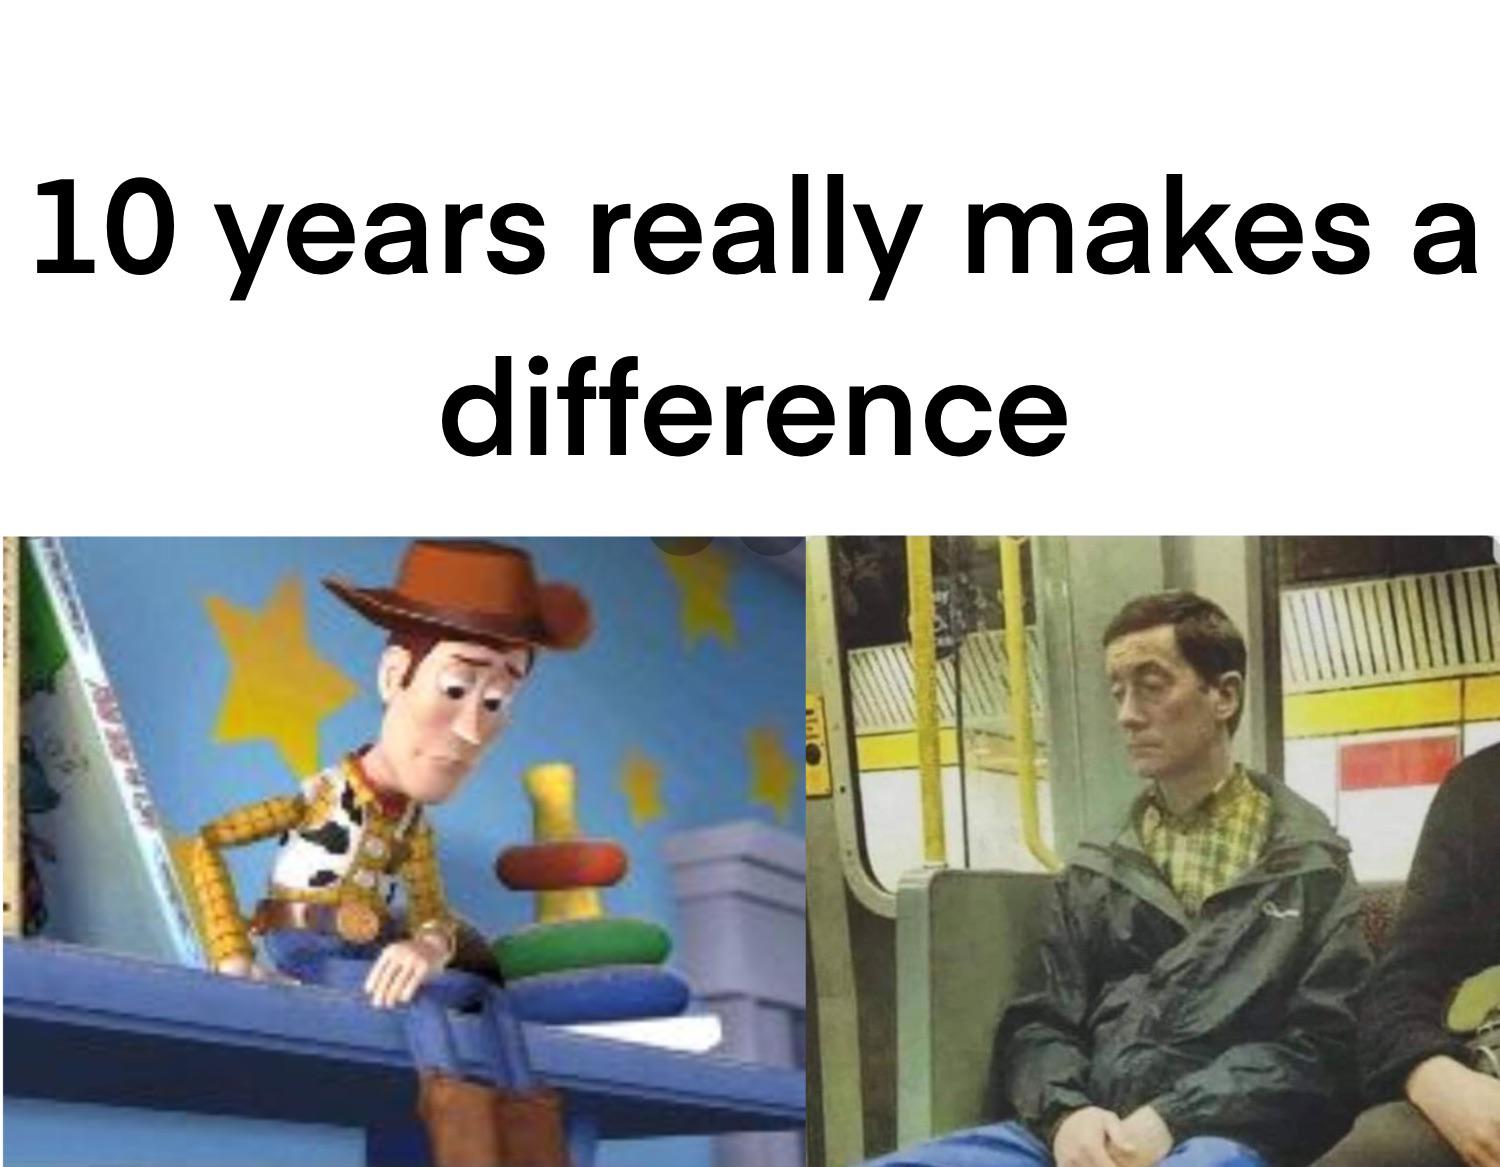 lewandowski woody - 10 years really makes a difference